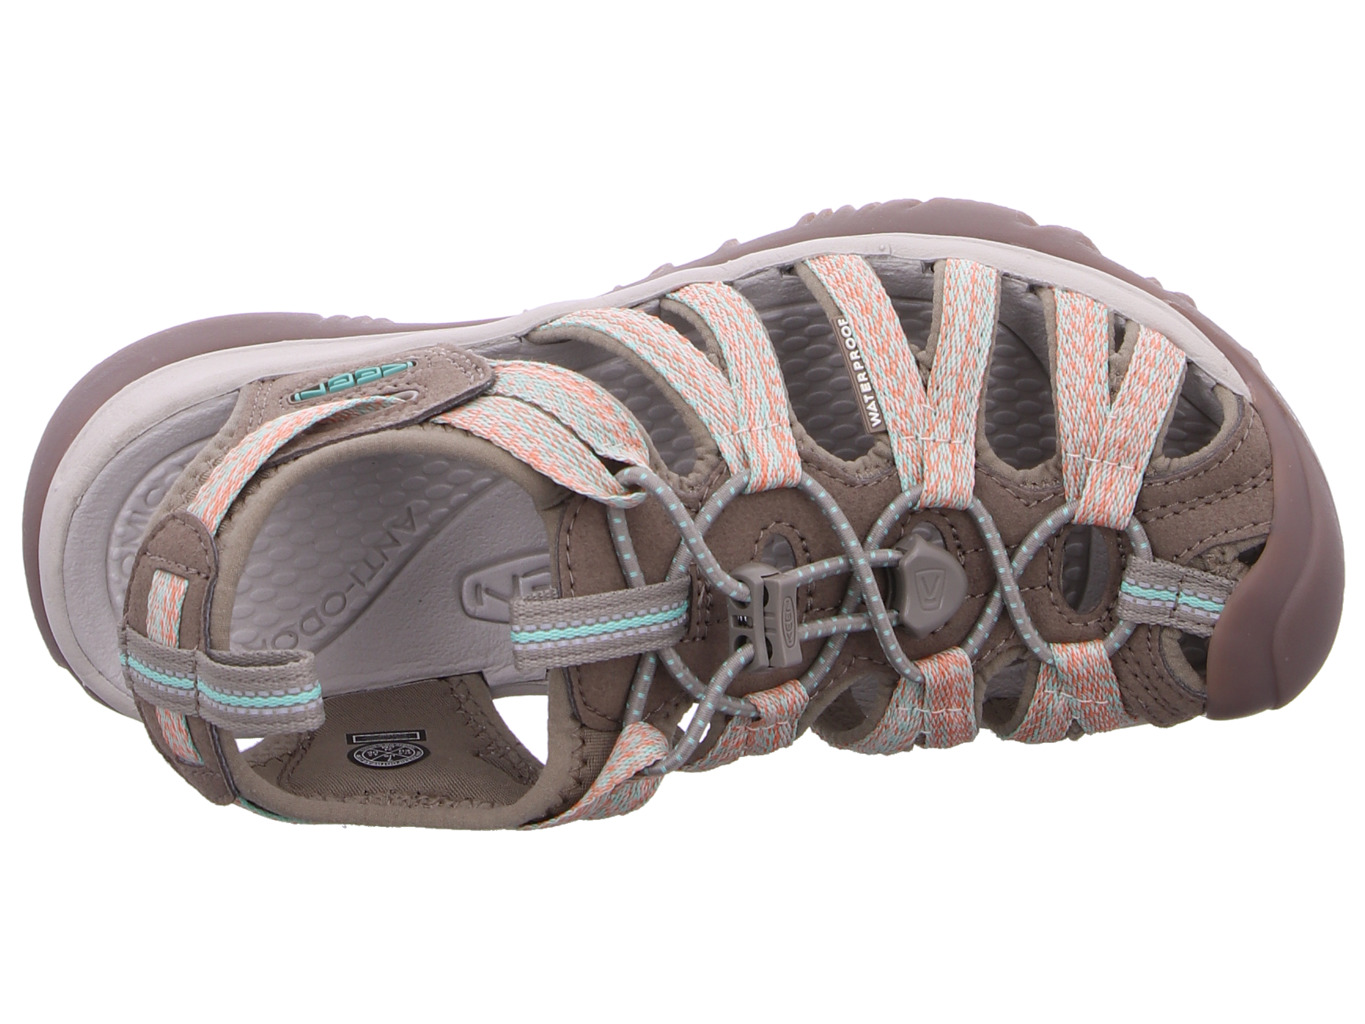 keen_whisper_taupe_coral_1022810_102281_7278